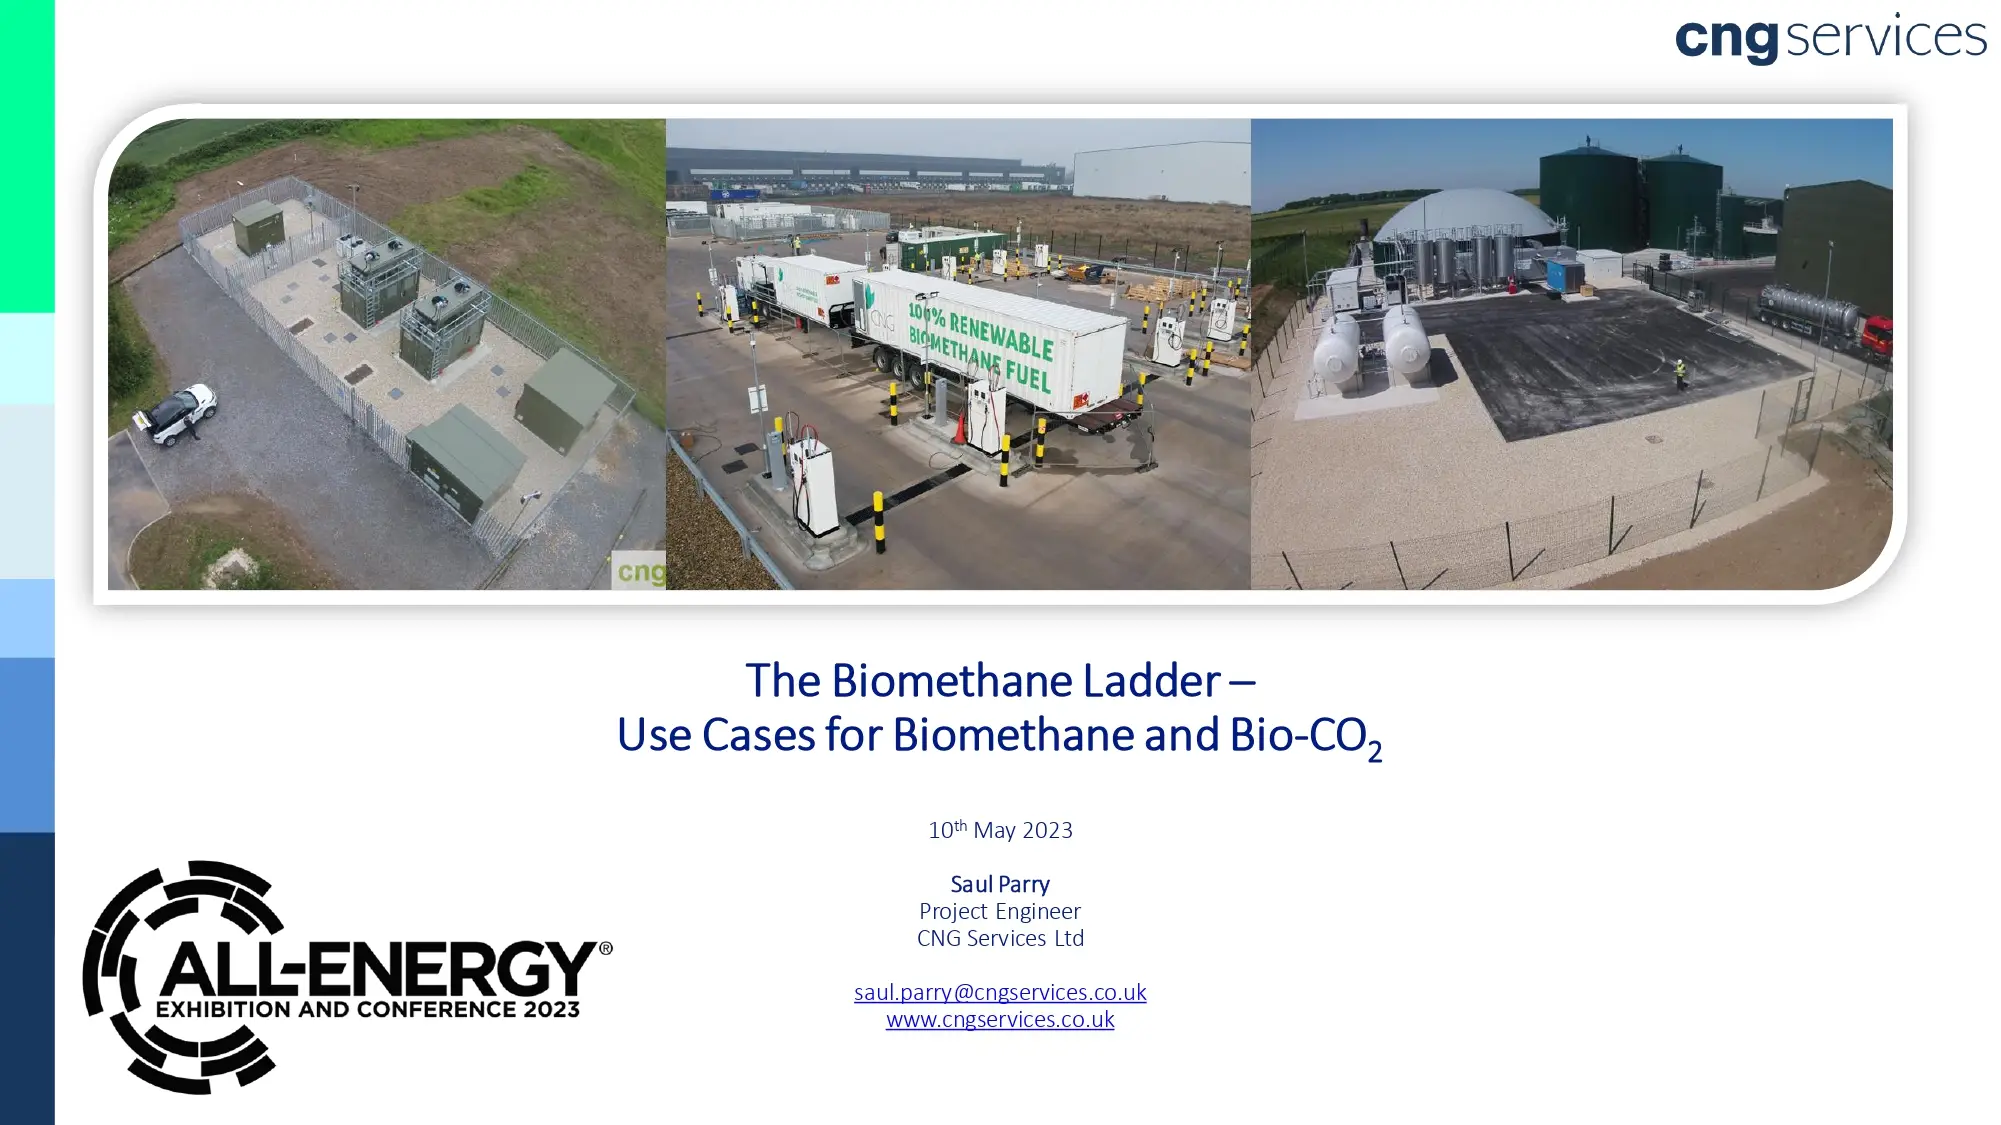 The Biomethane Ladder – Use Cases for Biomethane and Bio-CO2